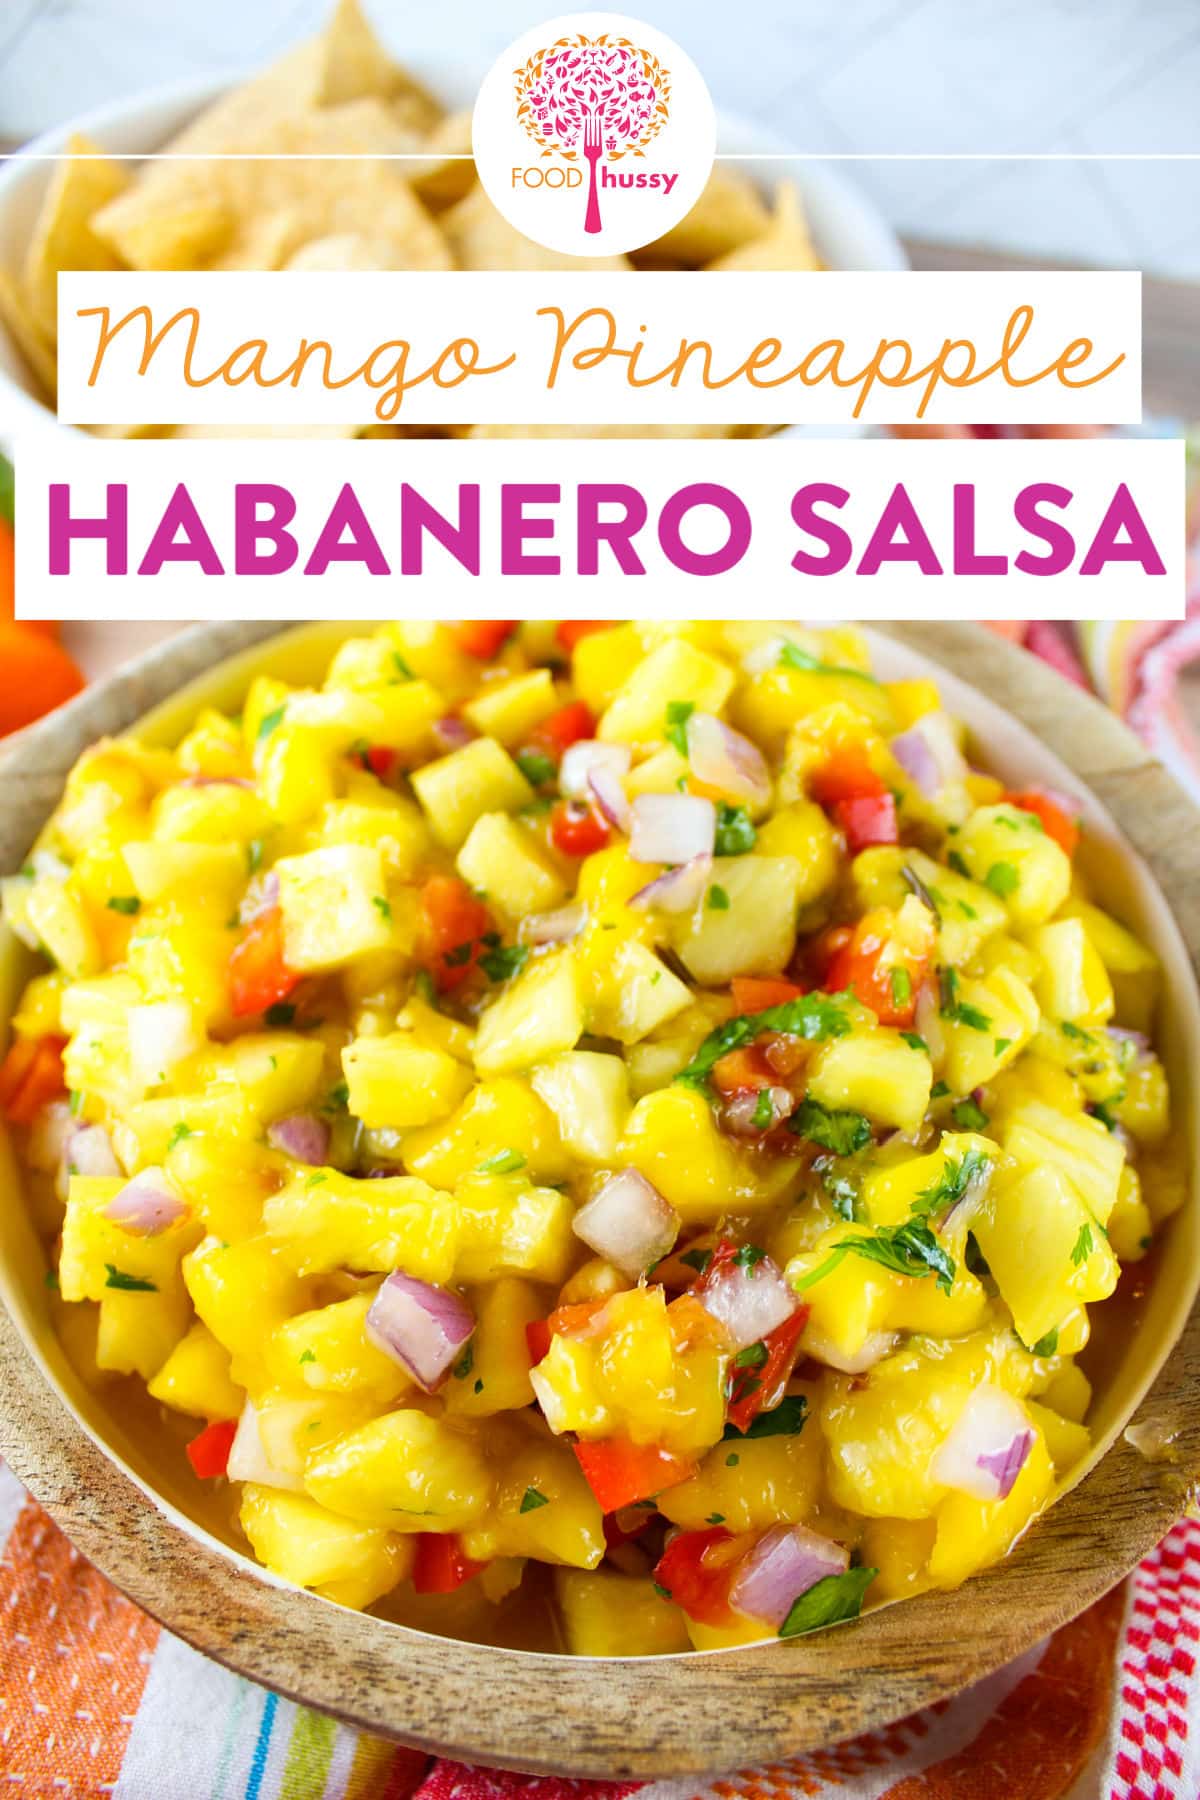 This Mango Pineapple Habanero Salsa is a flavor explosion in your mouth!! Every bite tastes better than the previous! The sweet from the mango and pineapple are balanced with the spiciness of the habanero and tartness of the lime juice. So yum! via @foodhussy